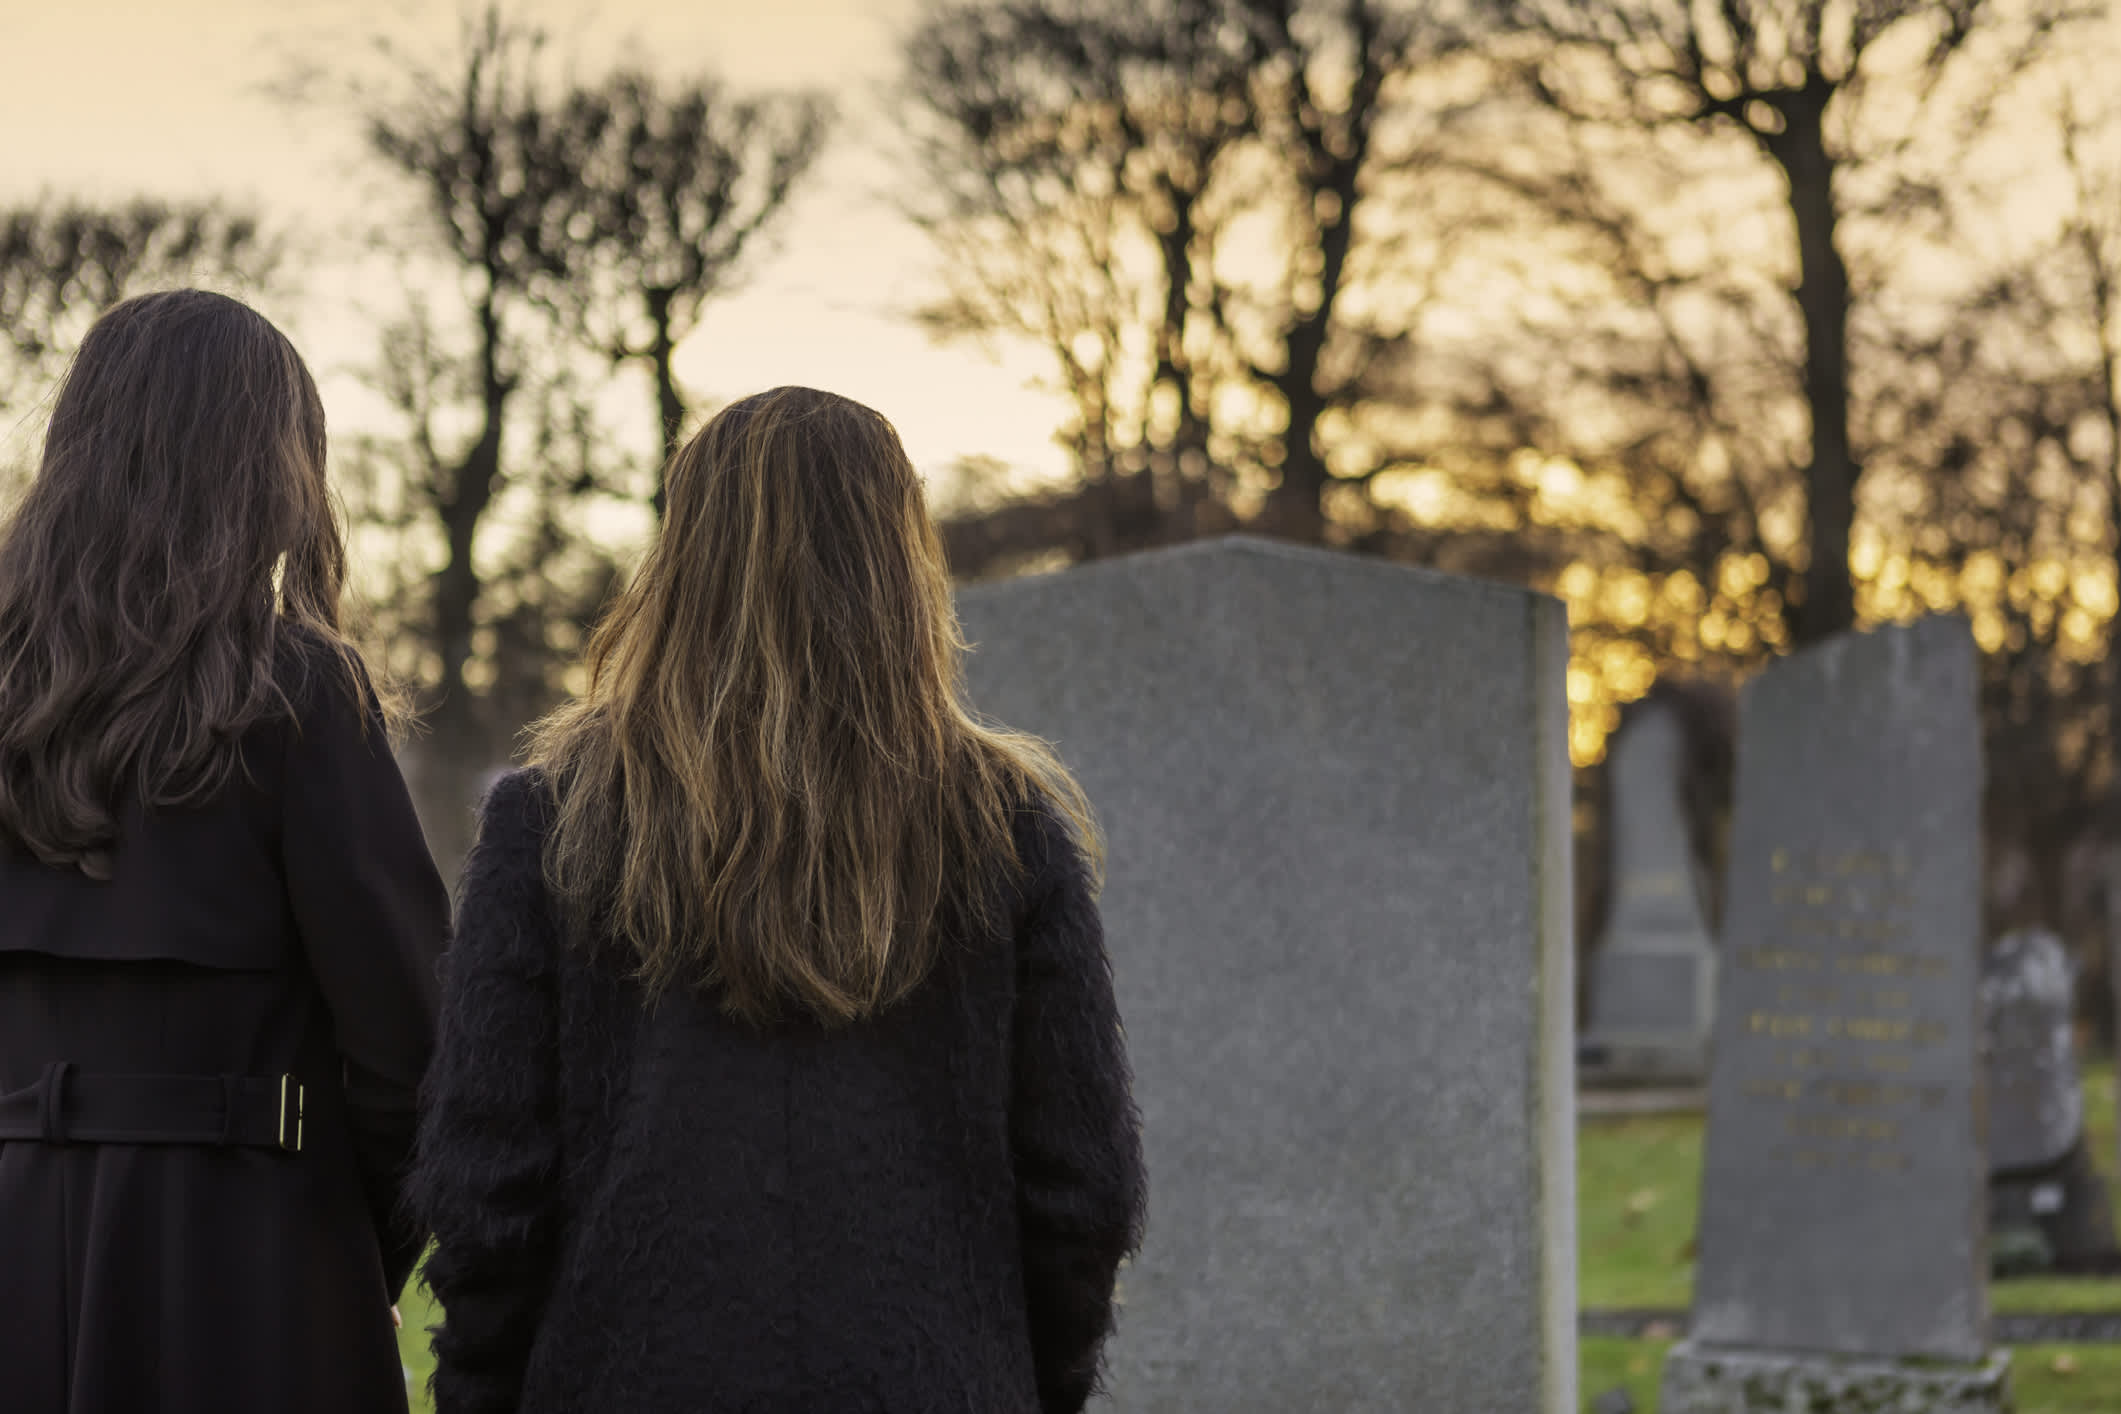 Here’s what happens to Social Security payments when someone dies